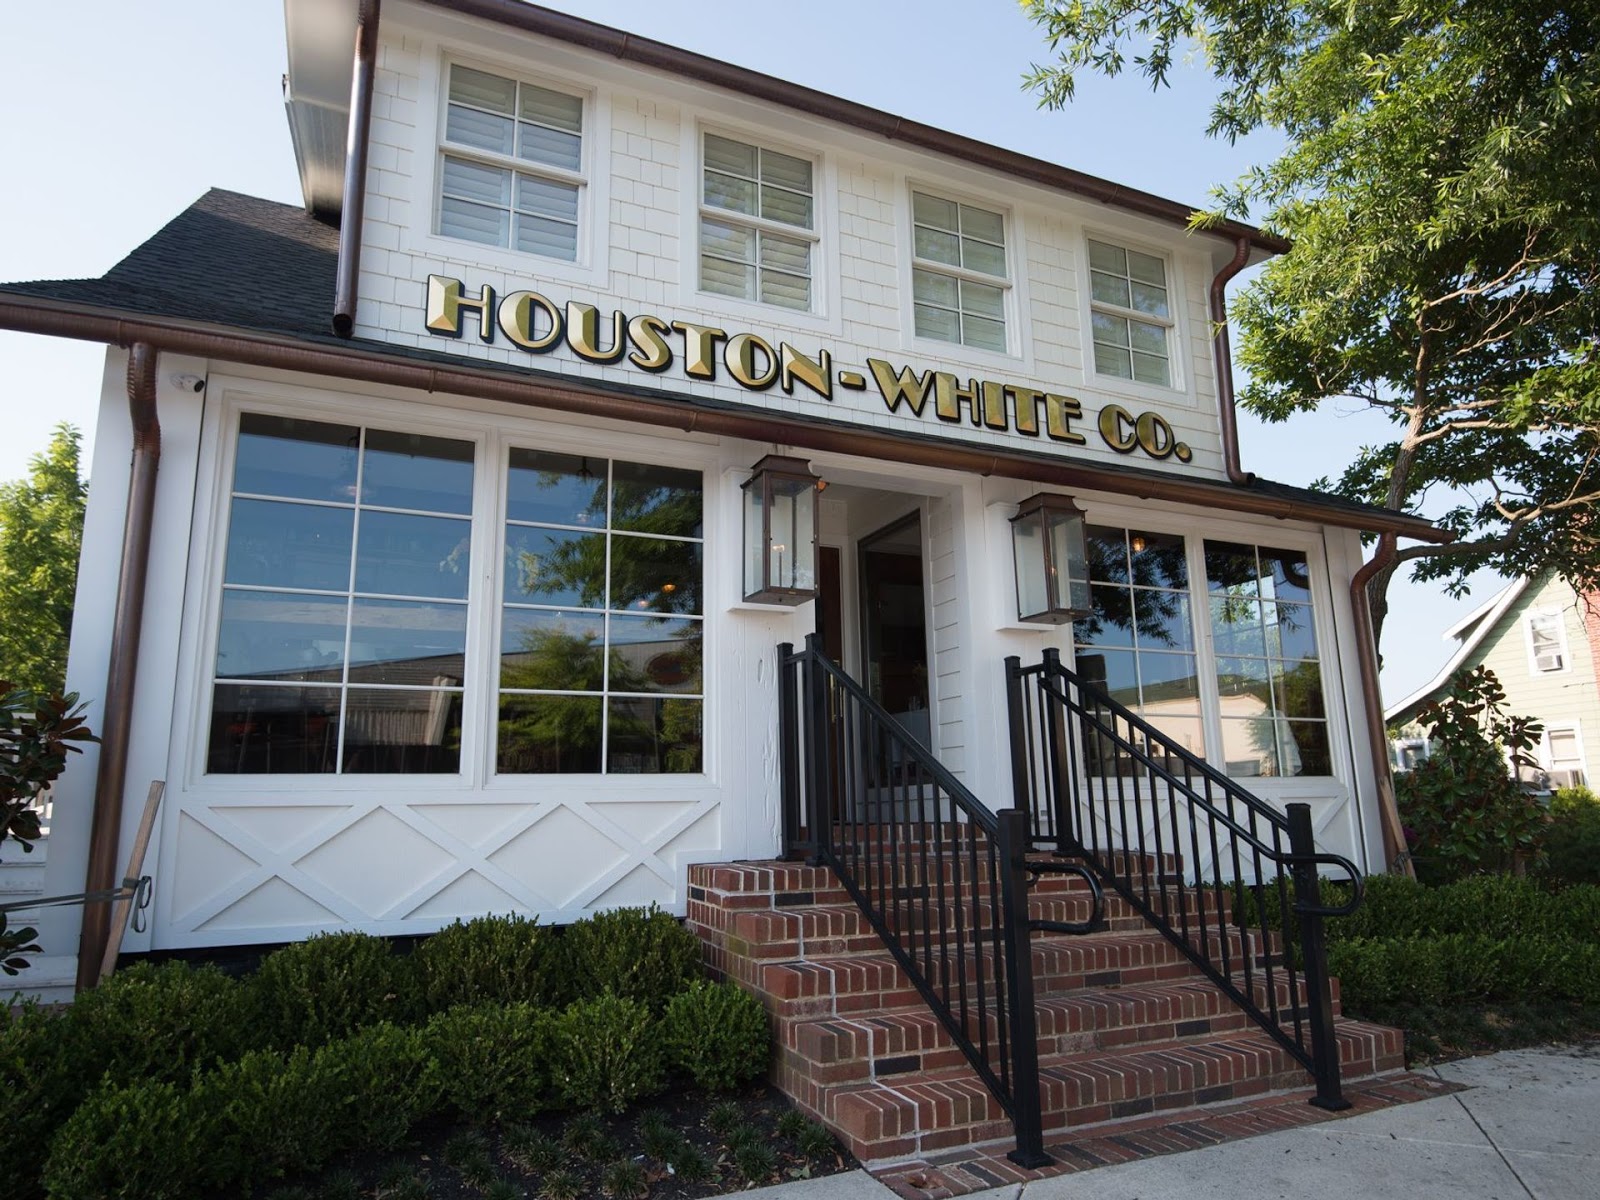 Houston White Co – Unparalleled dining experience